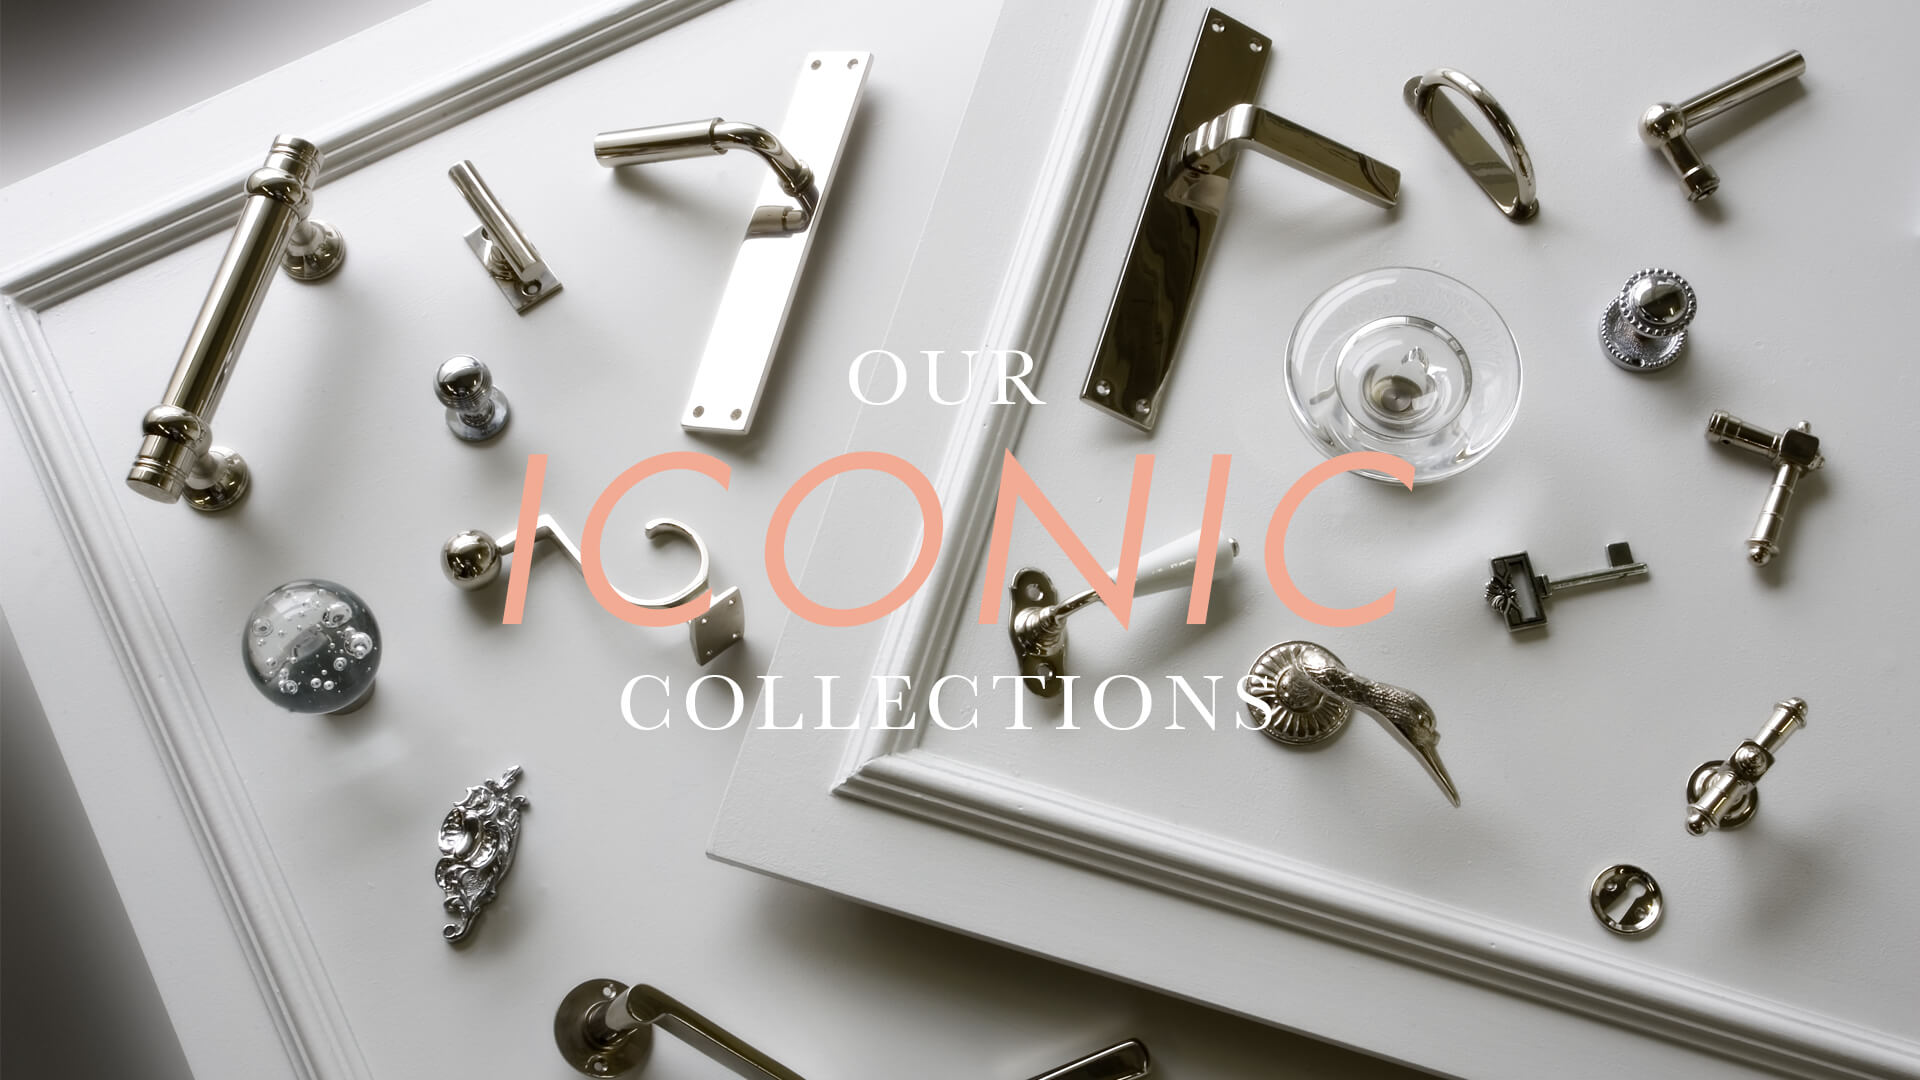 Our Iconic Collections: Lerou R-Collection, Lerou ML-Collection, Lerou Chemin De Fer, Lerou Taps, Lerou W-Collection, Lerou ML-Inox, Manufactur Lerou, Manufaktur Lerou, Bespoke Casting. Onze iconische collecties: Lerou R-Collectie, Lerou ML-Collectie, Lerou Chemin De Fer, Lerou Taps, Lerou W-Collectie, Lerou ML-Inox, Manufactur Lerou, Manufaktur Lerou.